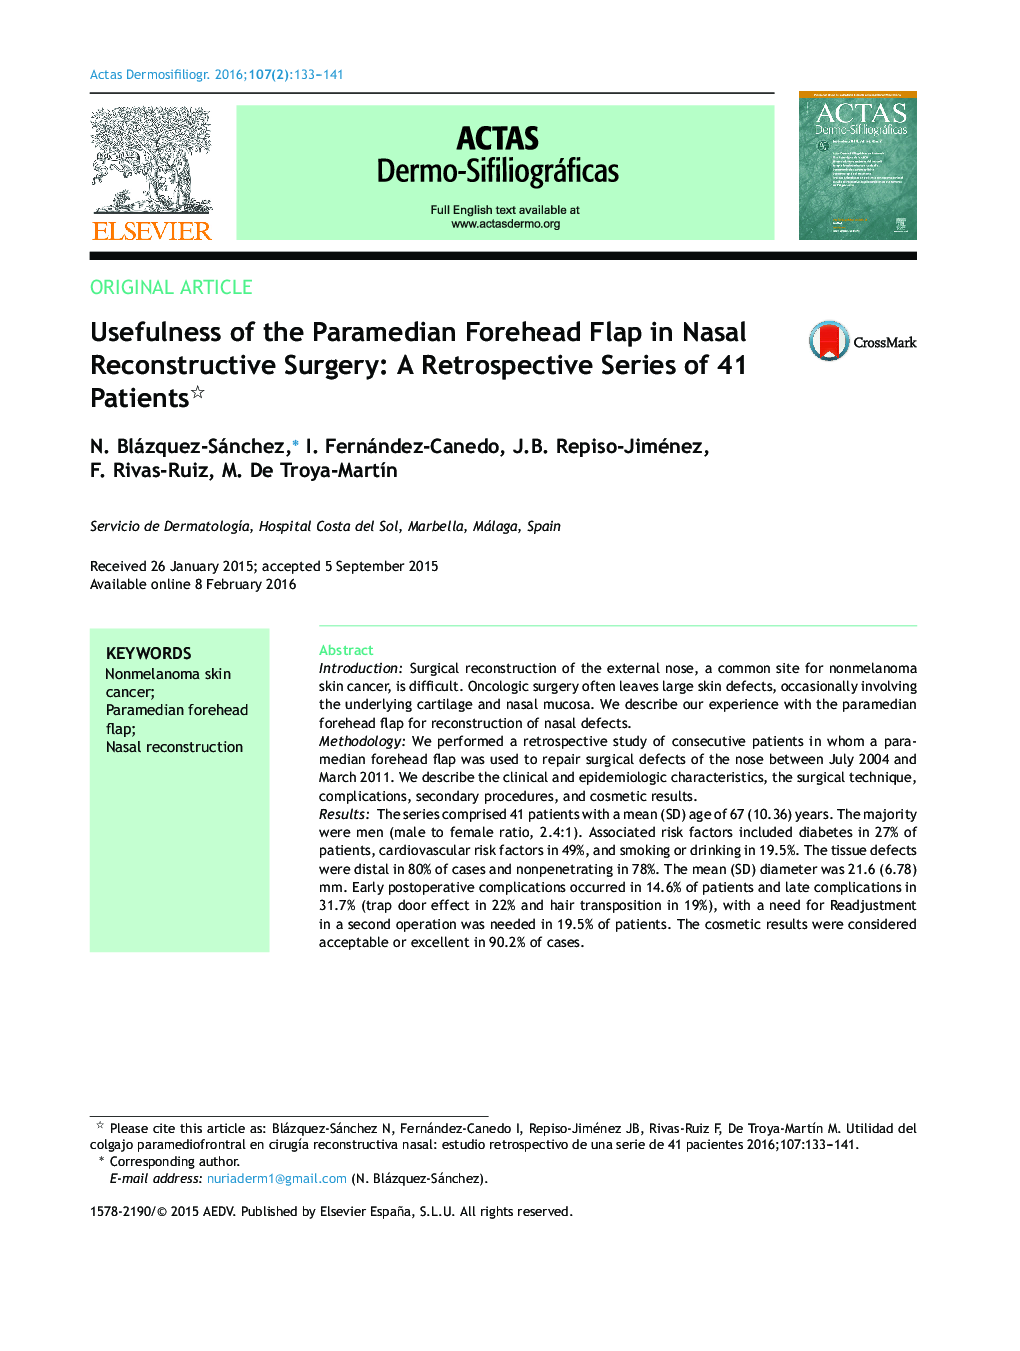 Usefulness of the Paramedian Forehead Flap in Nasal Reconstructive Surgery: A Retrospective Series of 41 Patients